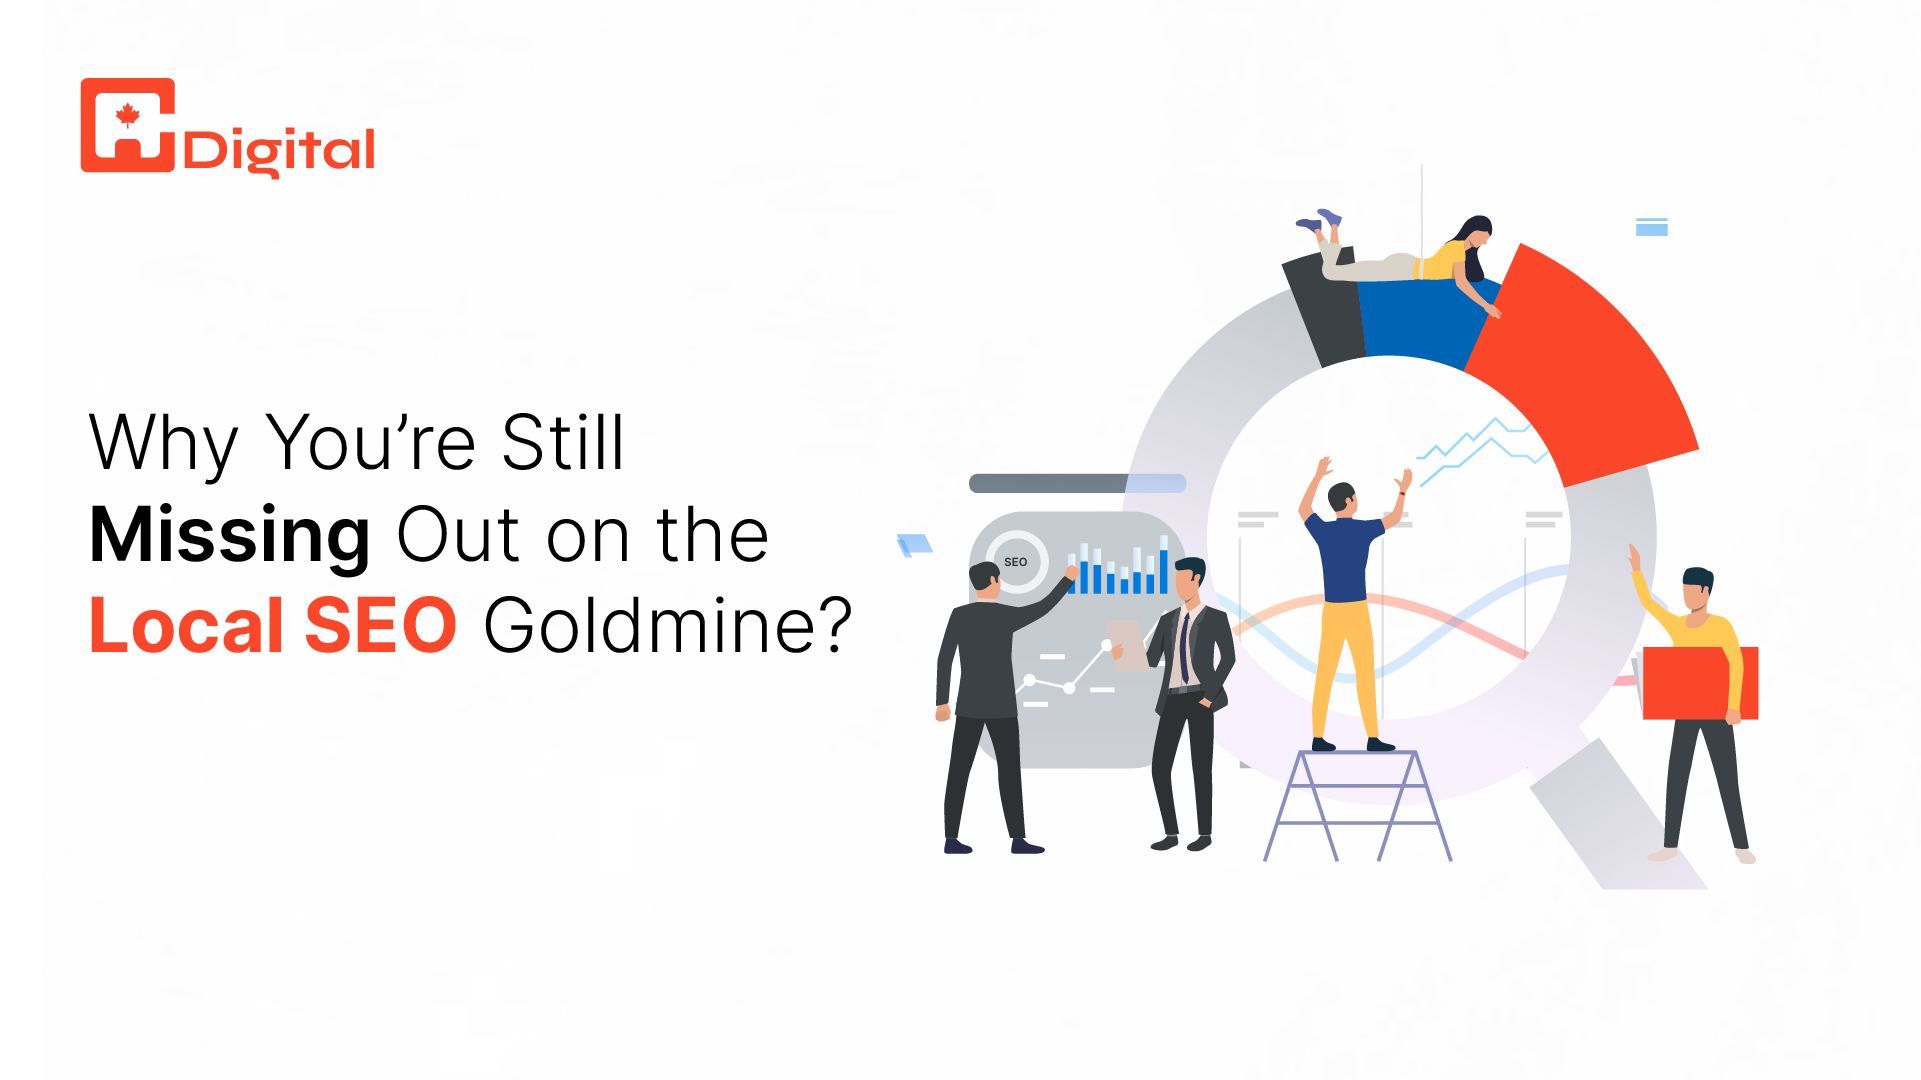 Why You’re Still Missing Out on the Local SEO Goldmine?